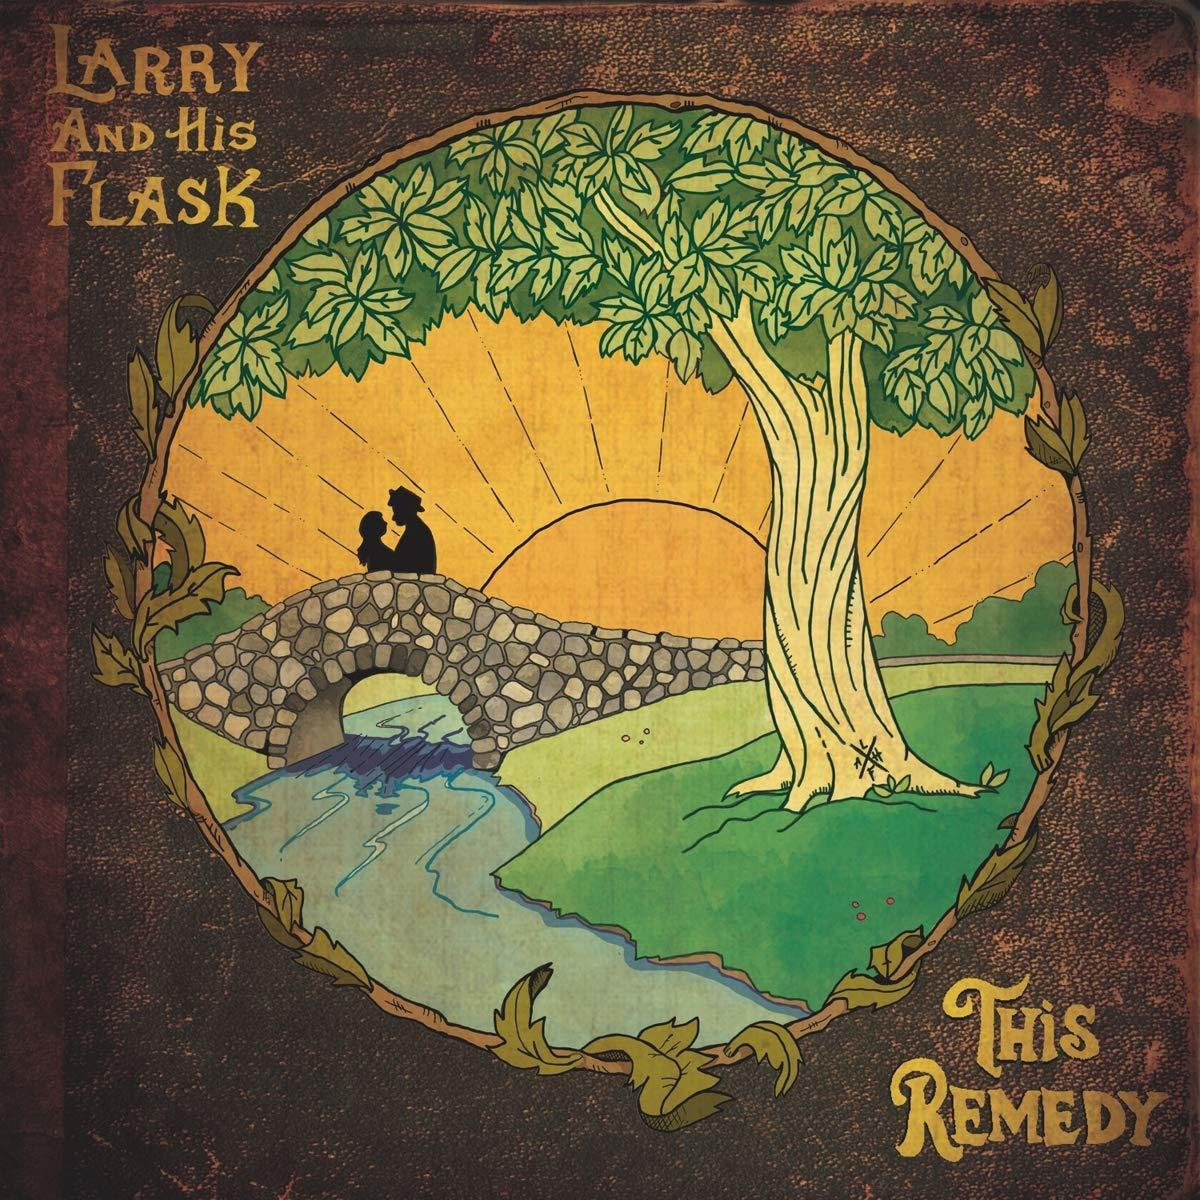 Flask Larry - His And - This (CD) Remedy